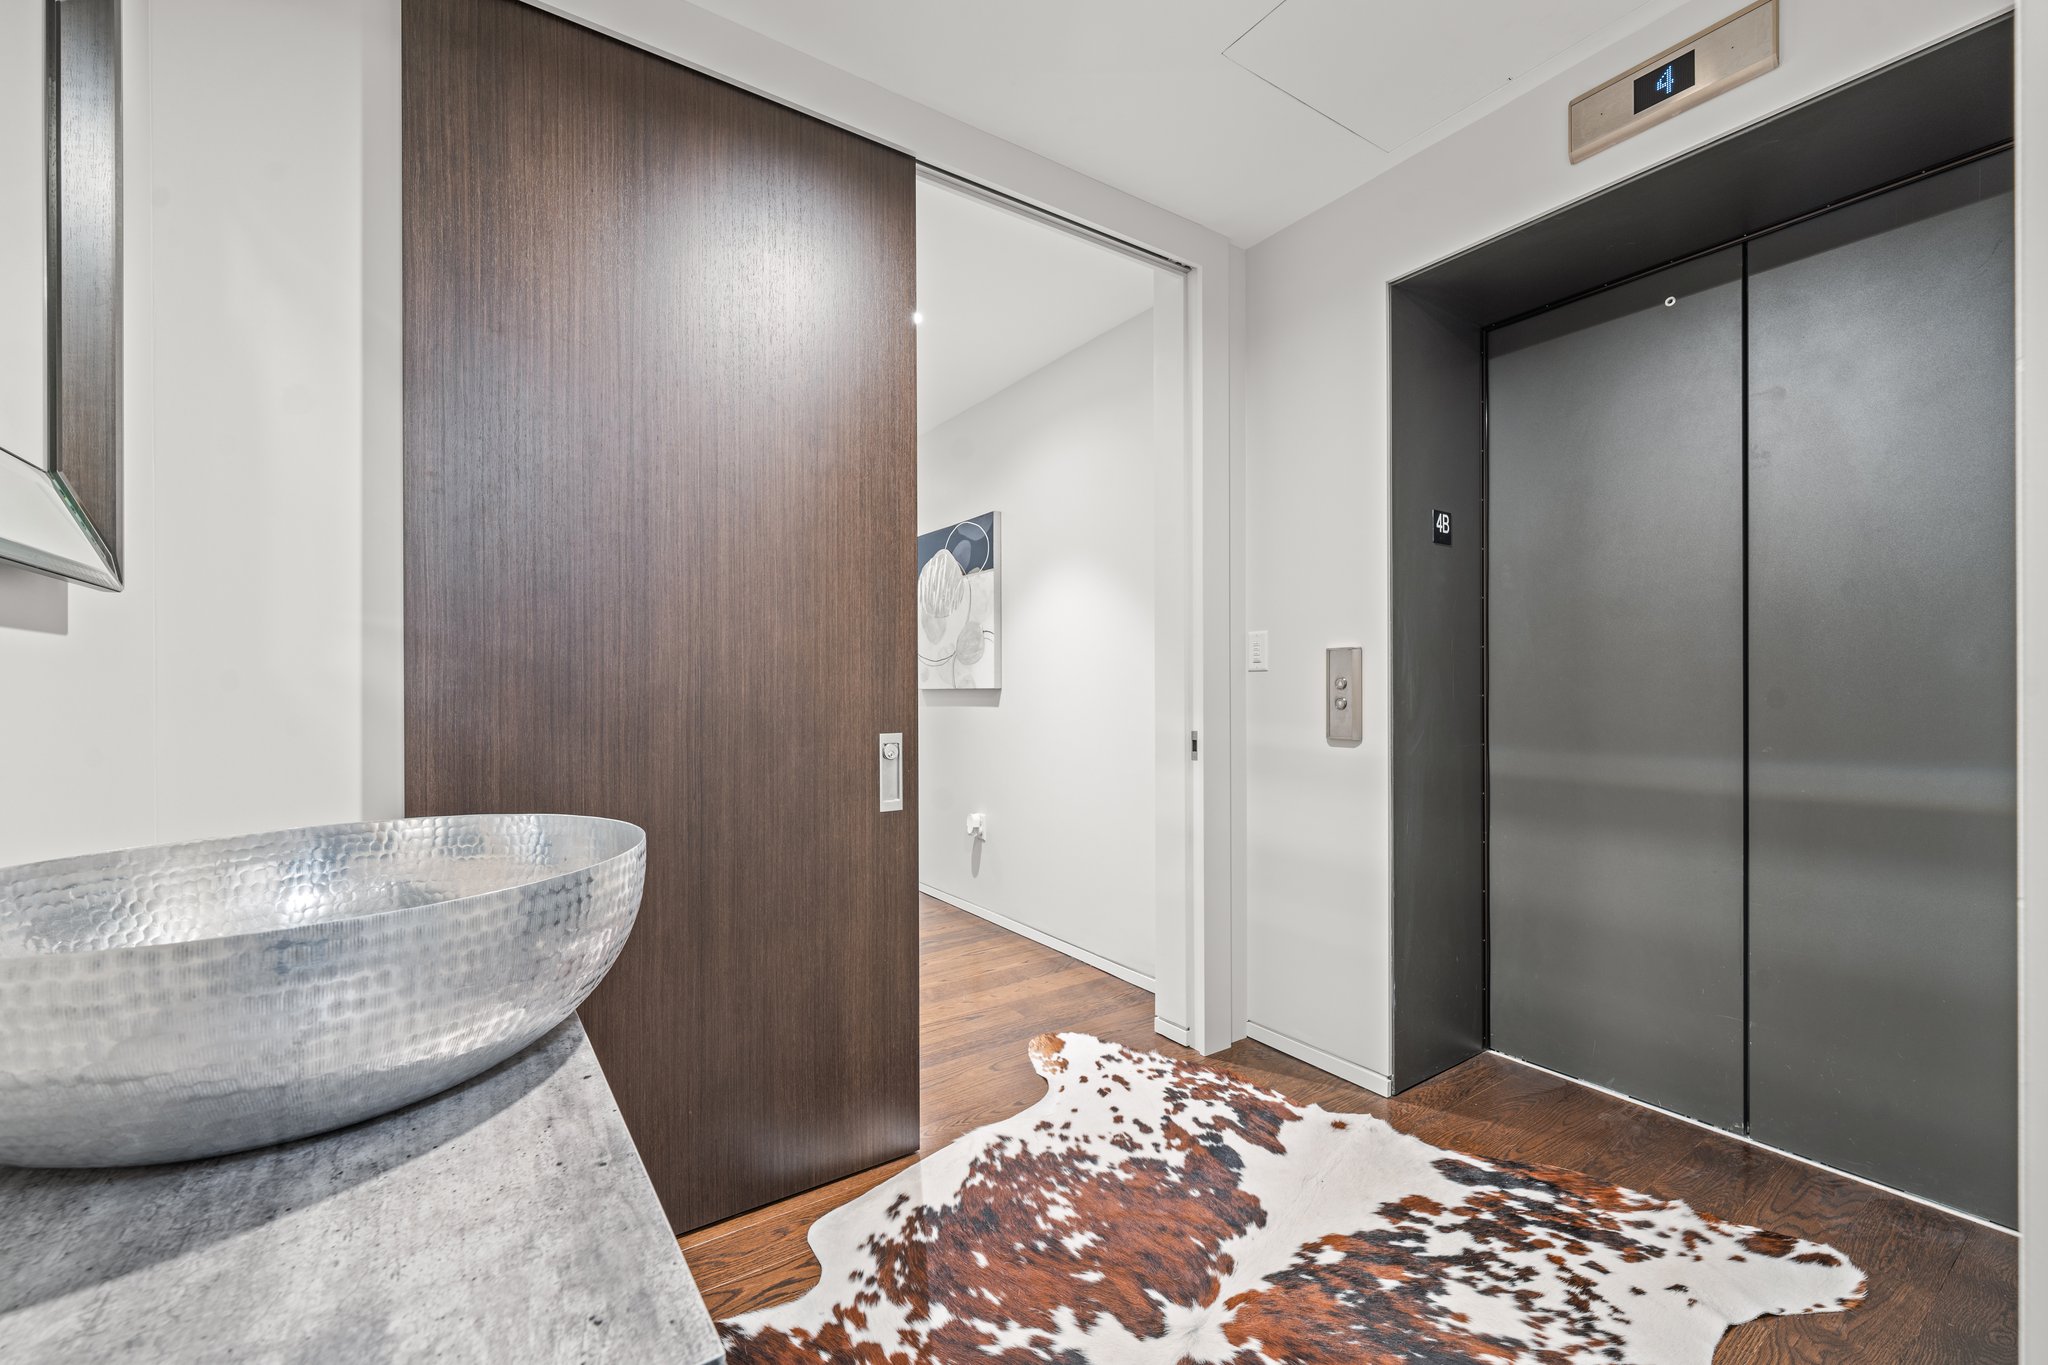 Elevator Access: Direct to Unit from Lobby AND Garage